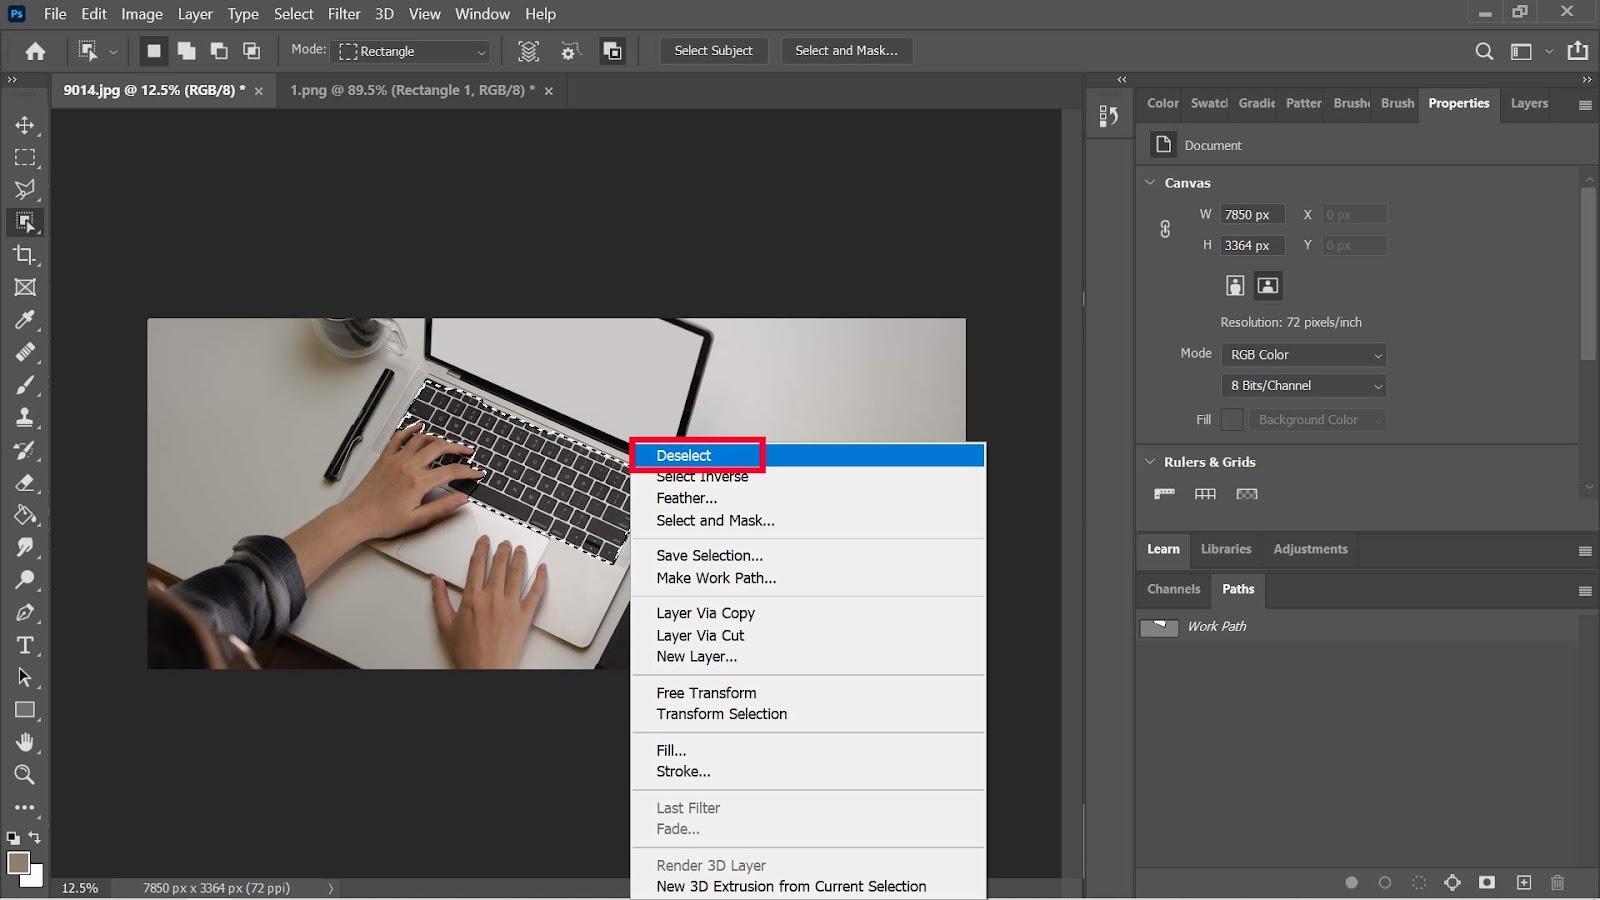 Deselect in photoshop